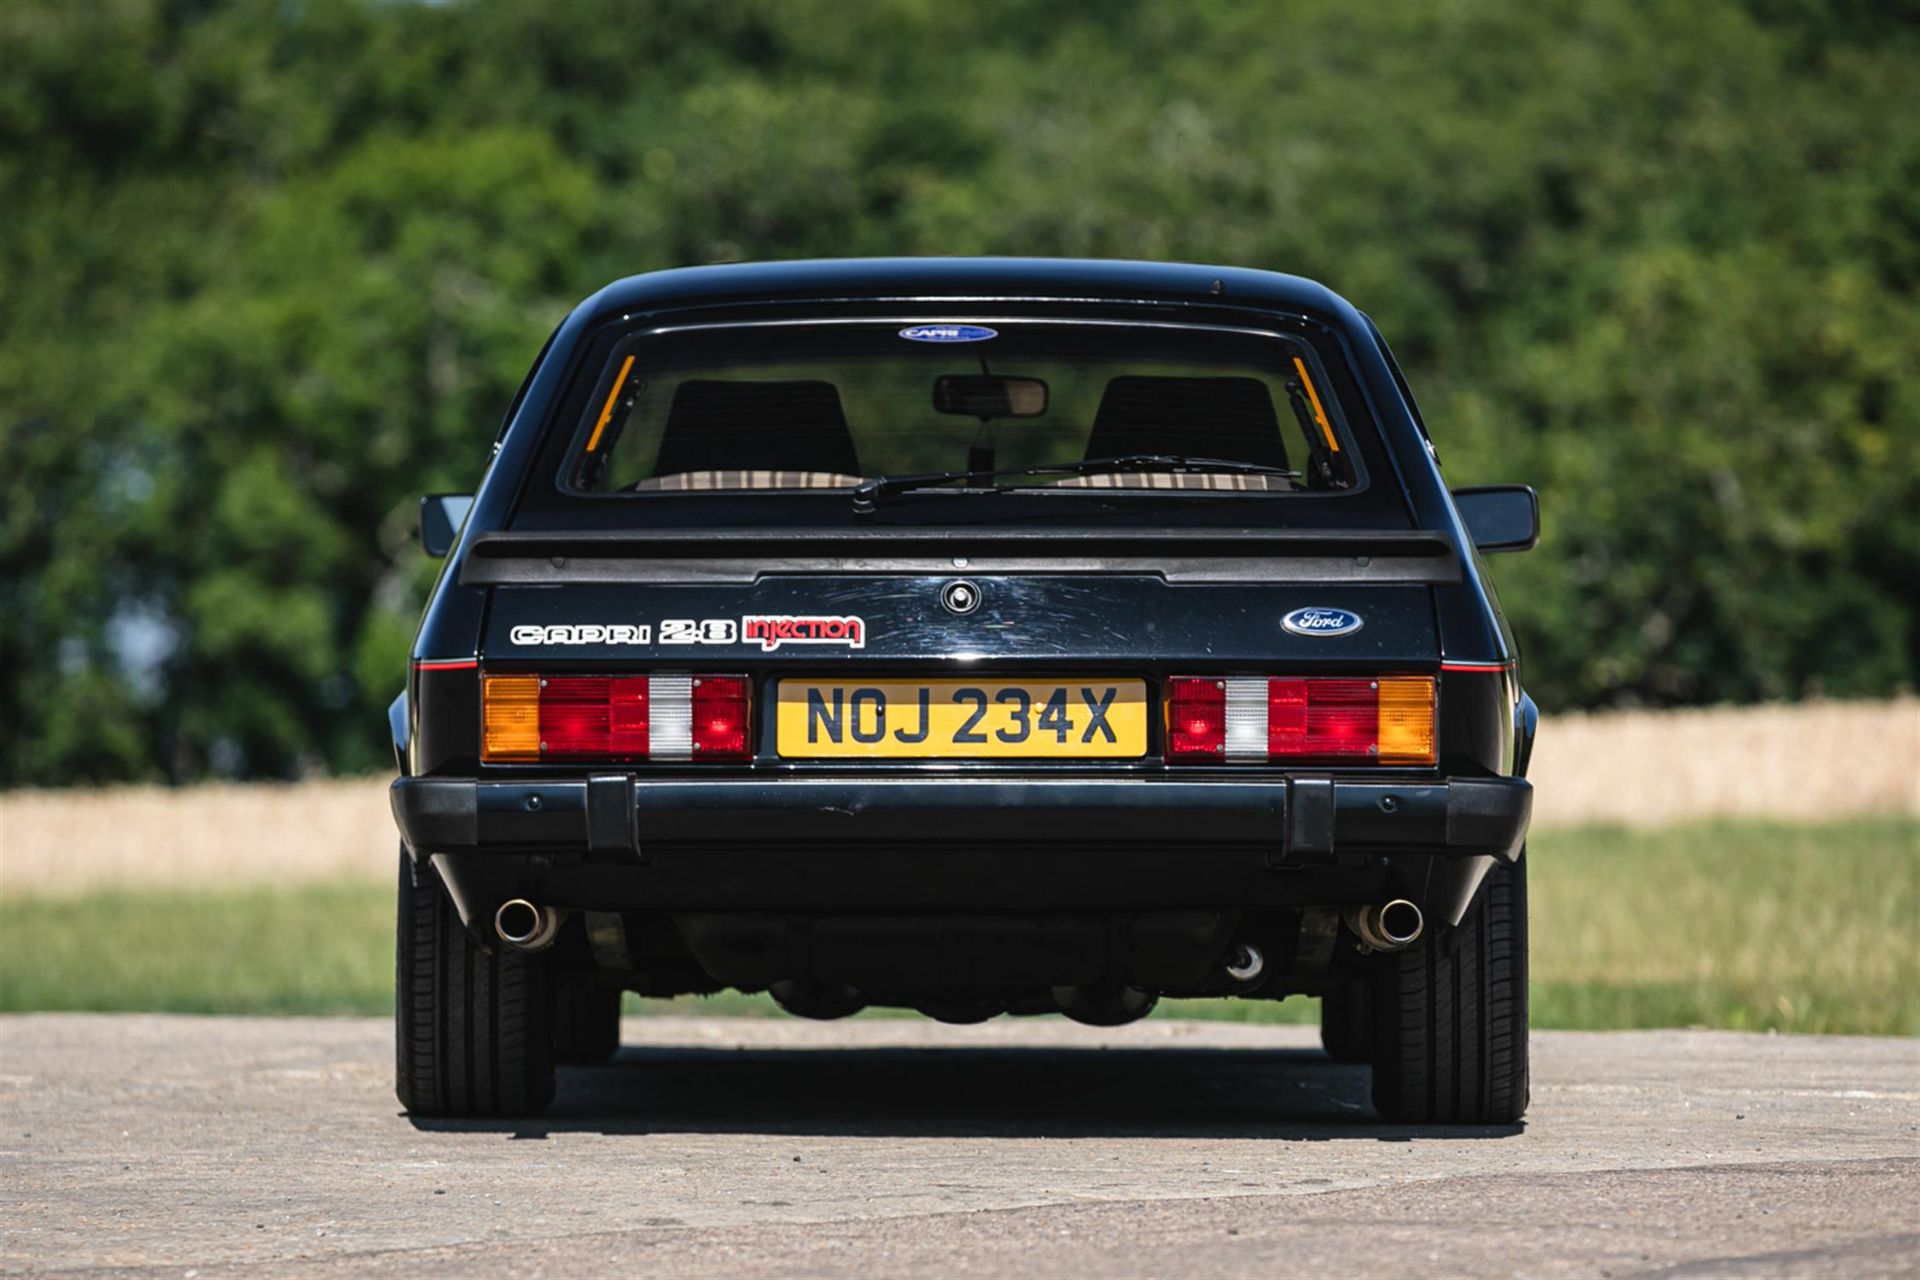 1982 Ford Capri 2.8-Litre injection (Ex-Alfie Moon, BBC EastEnders) - Image 7 of 10